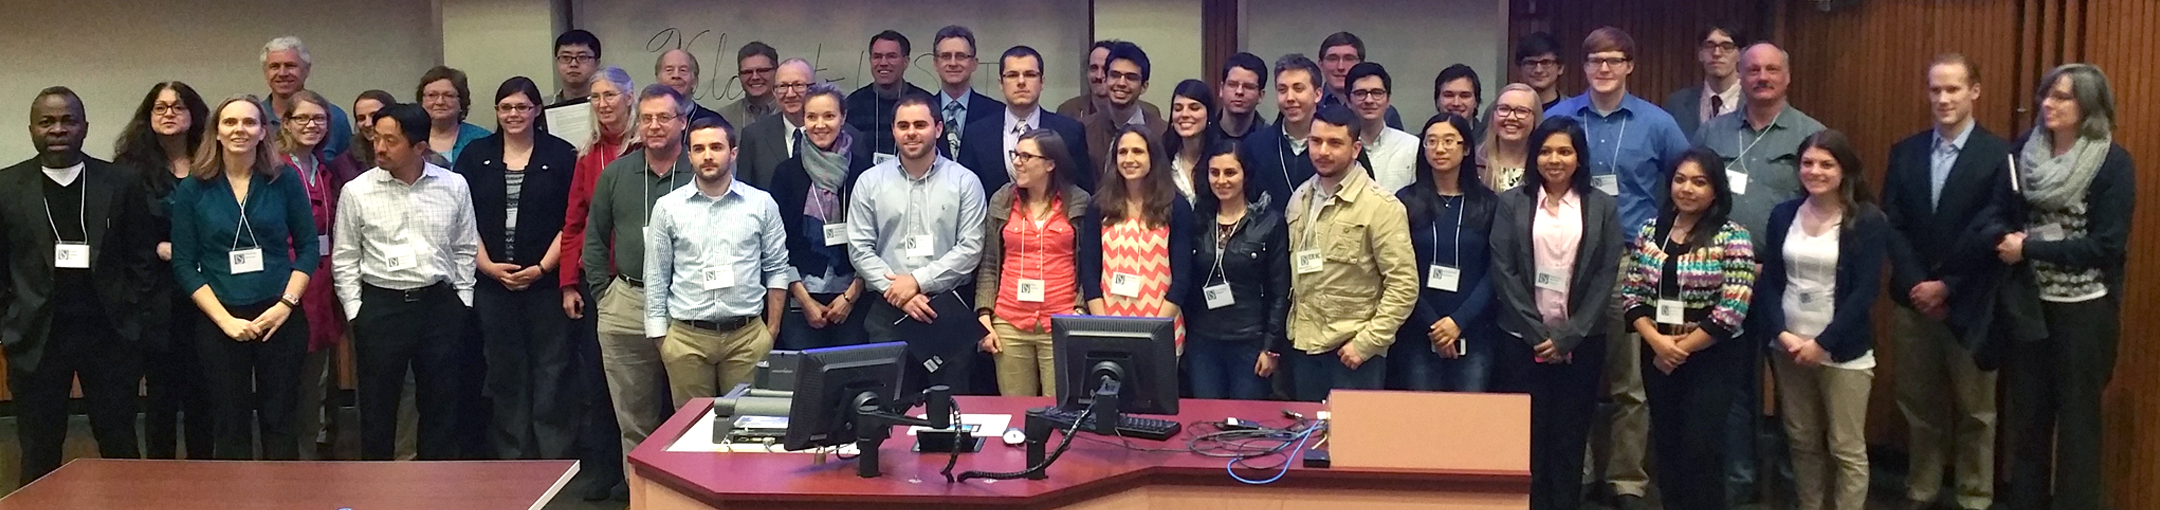 group shot of UPSTAT attendees